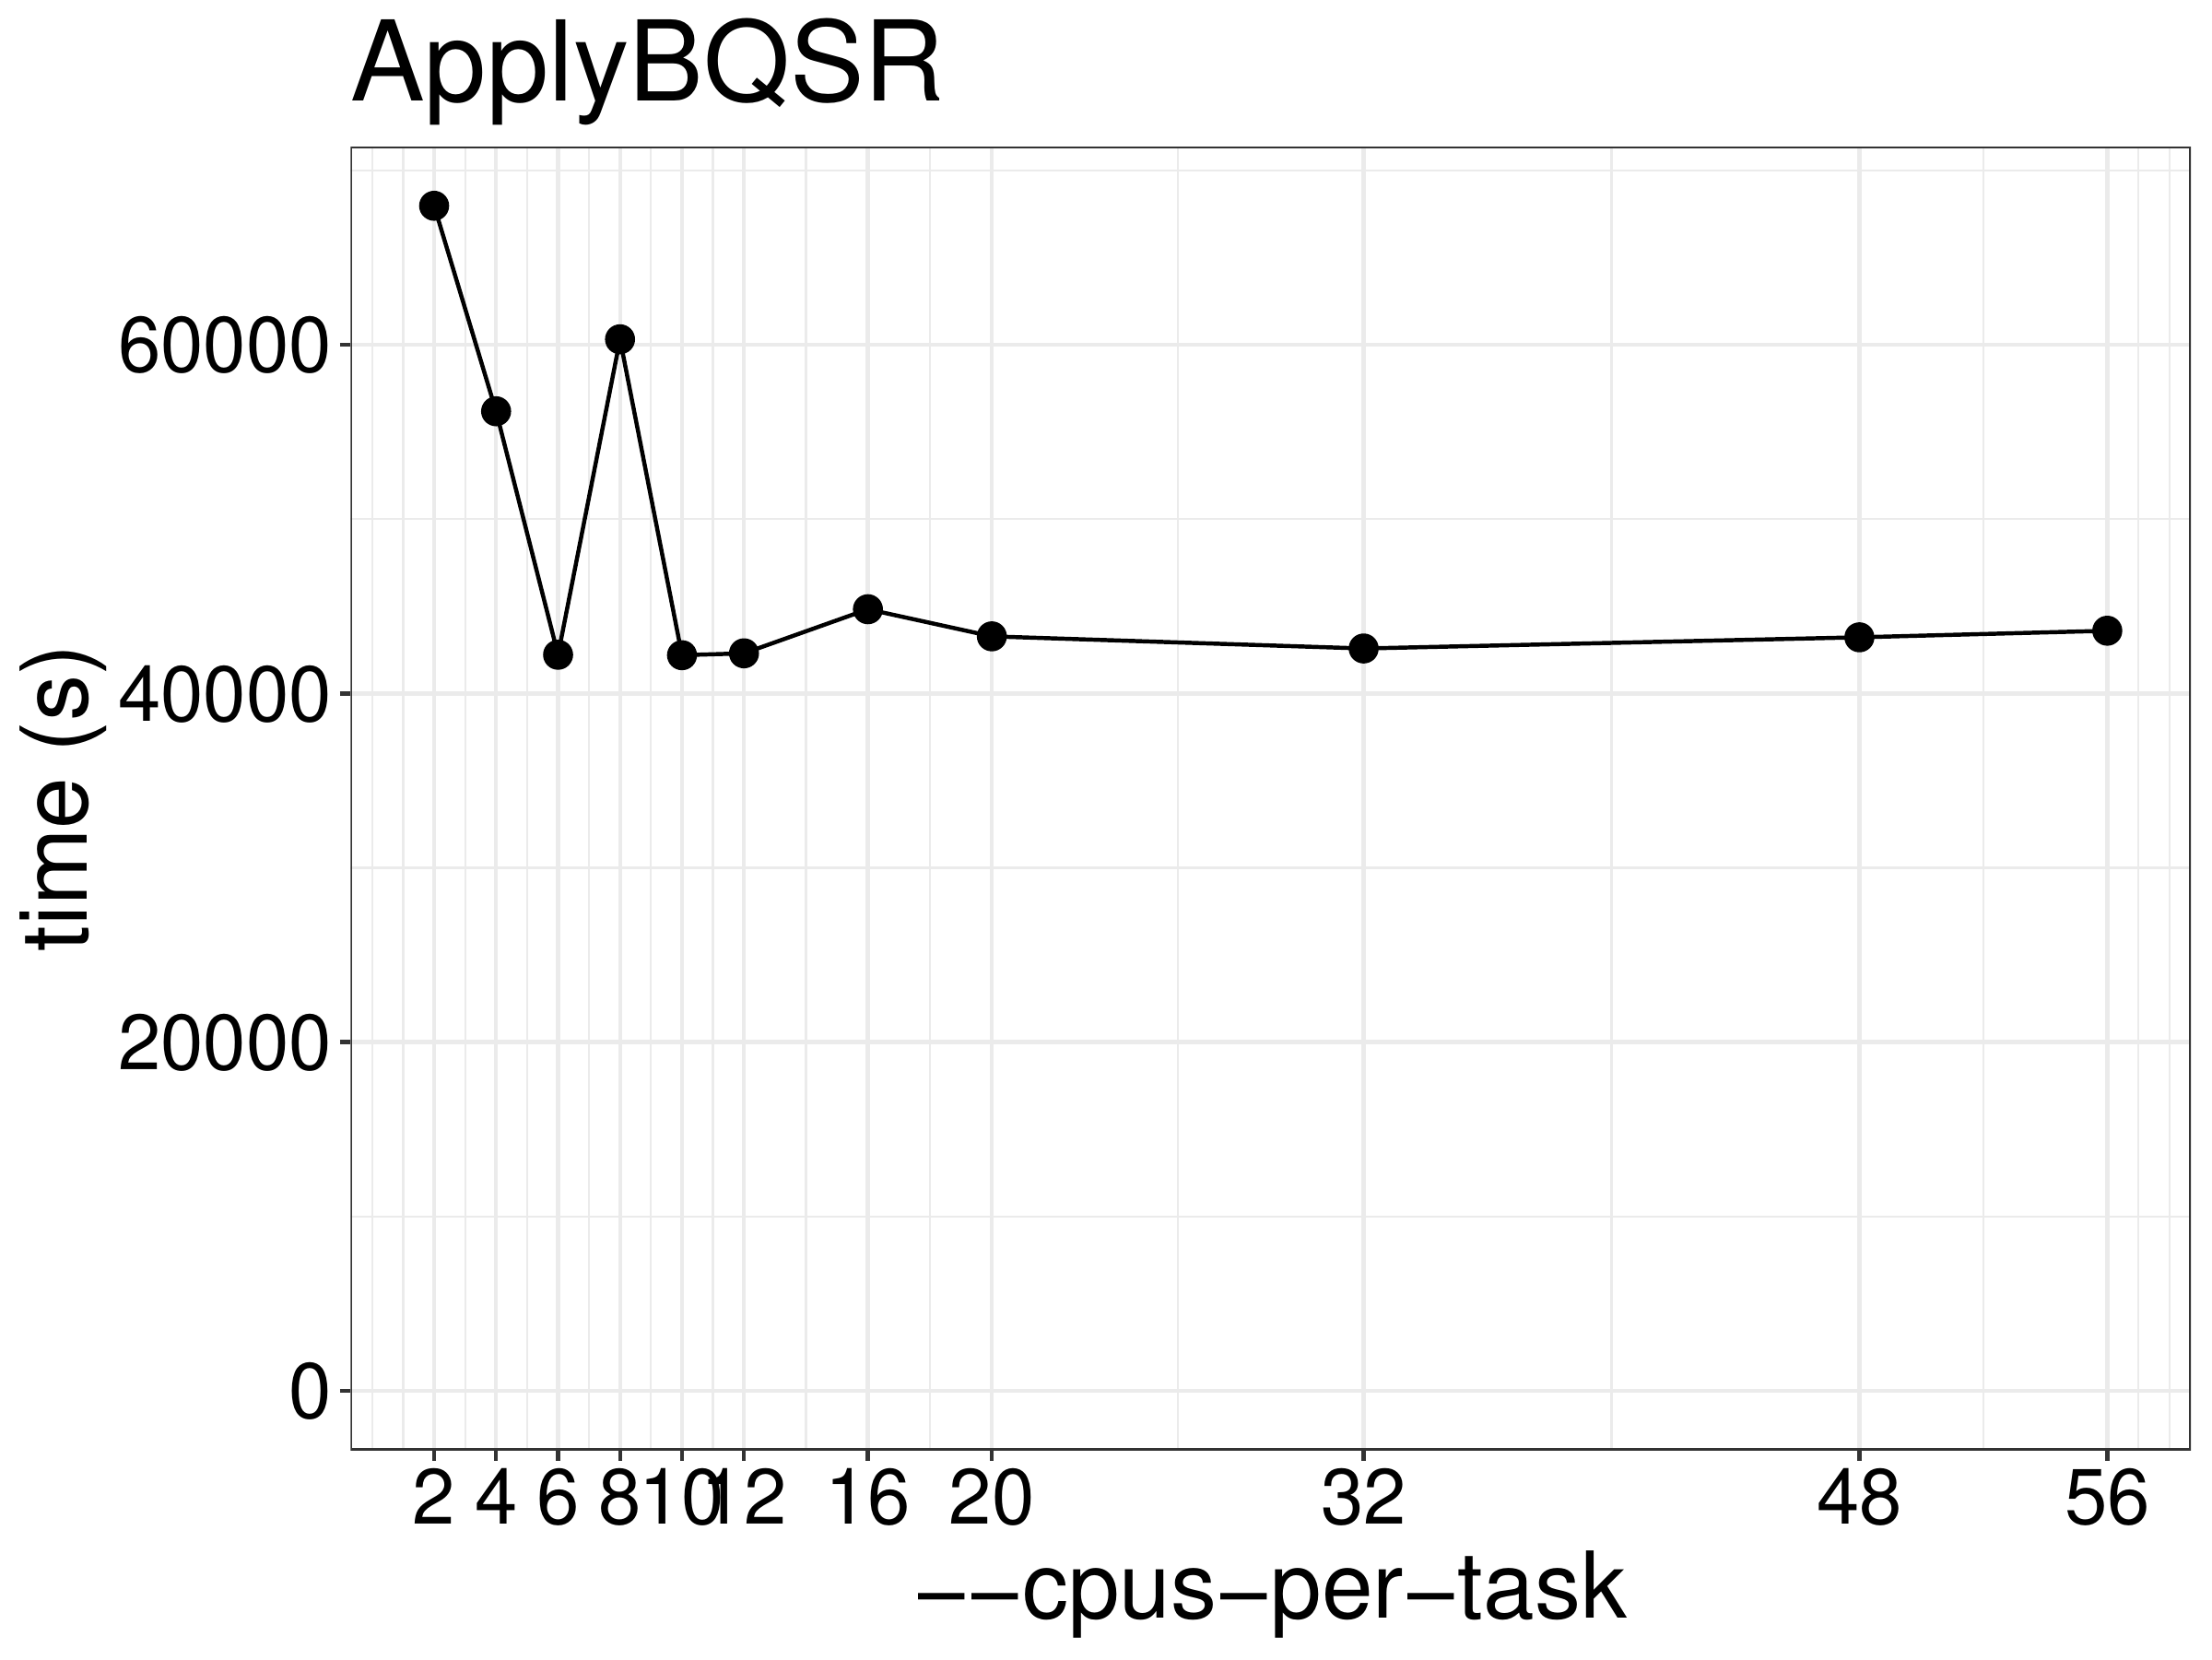 ApplyBQSR runtime as a function of the number of threads.